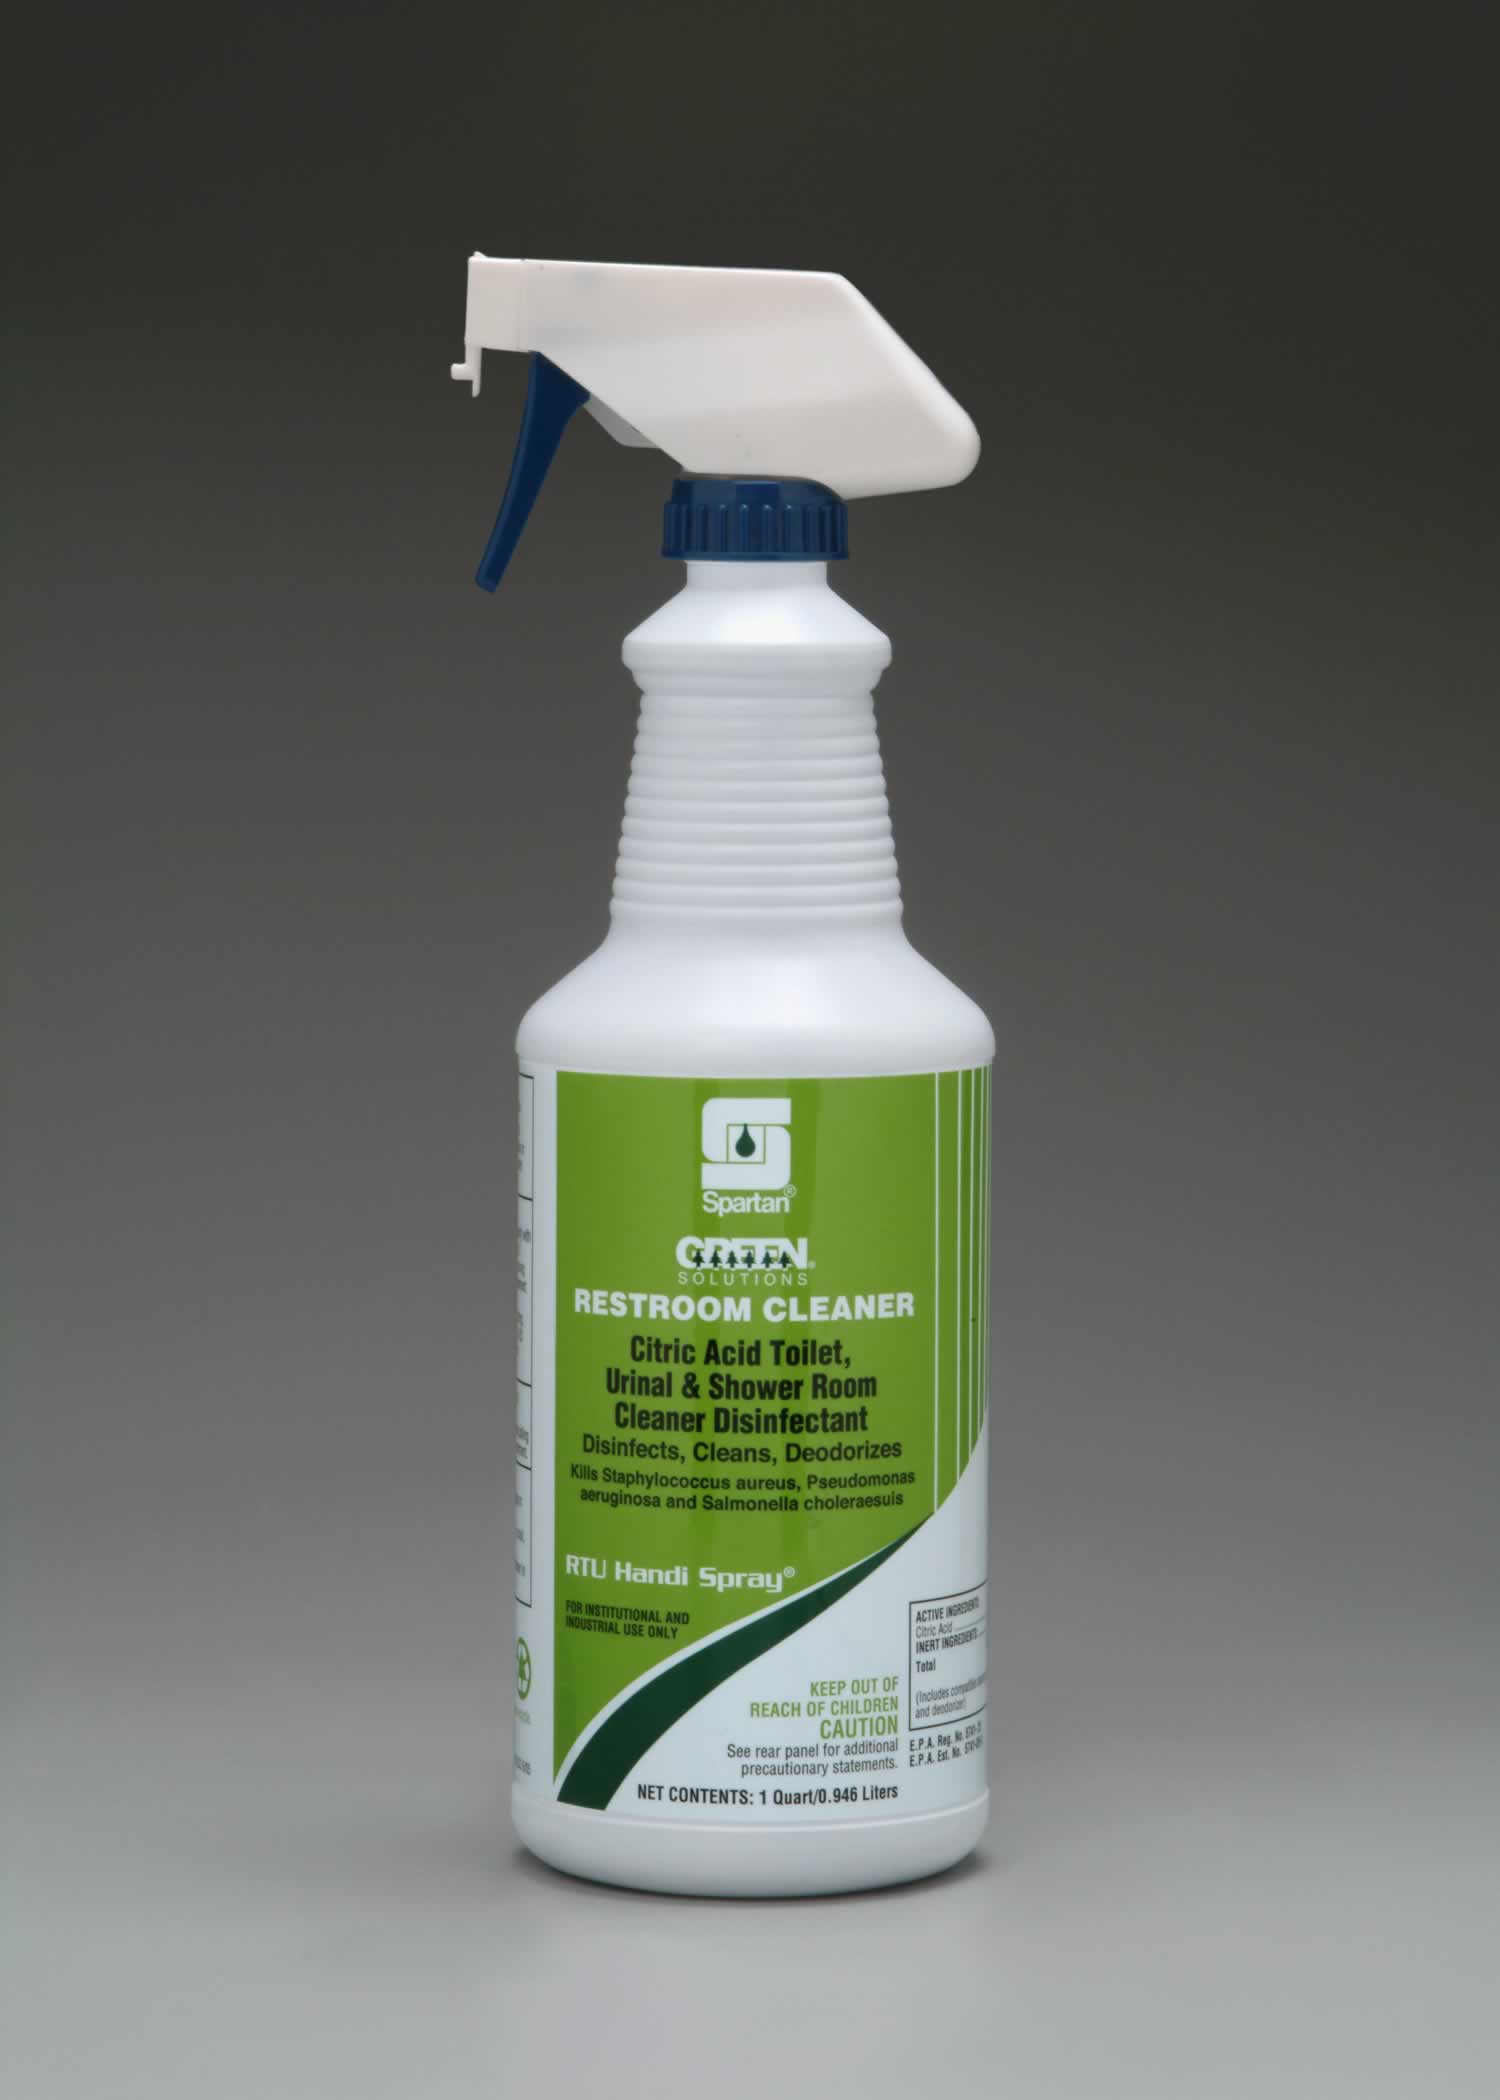 GS restroom cleaner made from natural acid for quick removal of soap scum, water spots, and even light rust